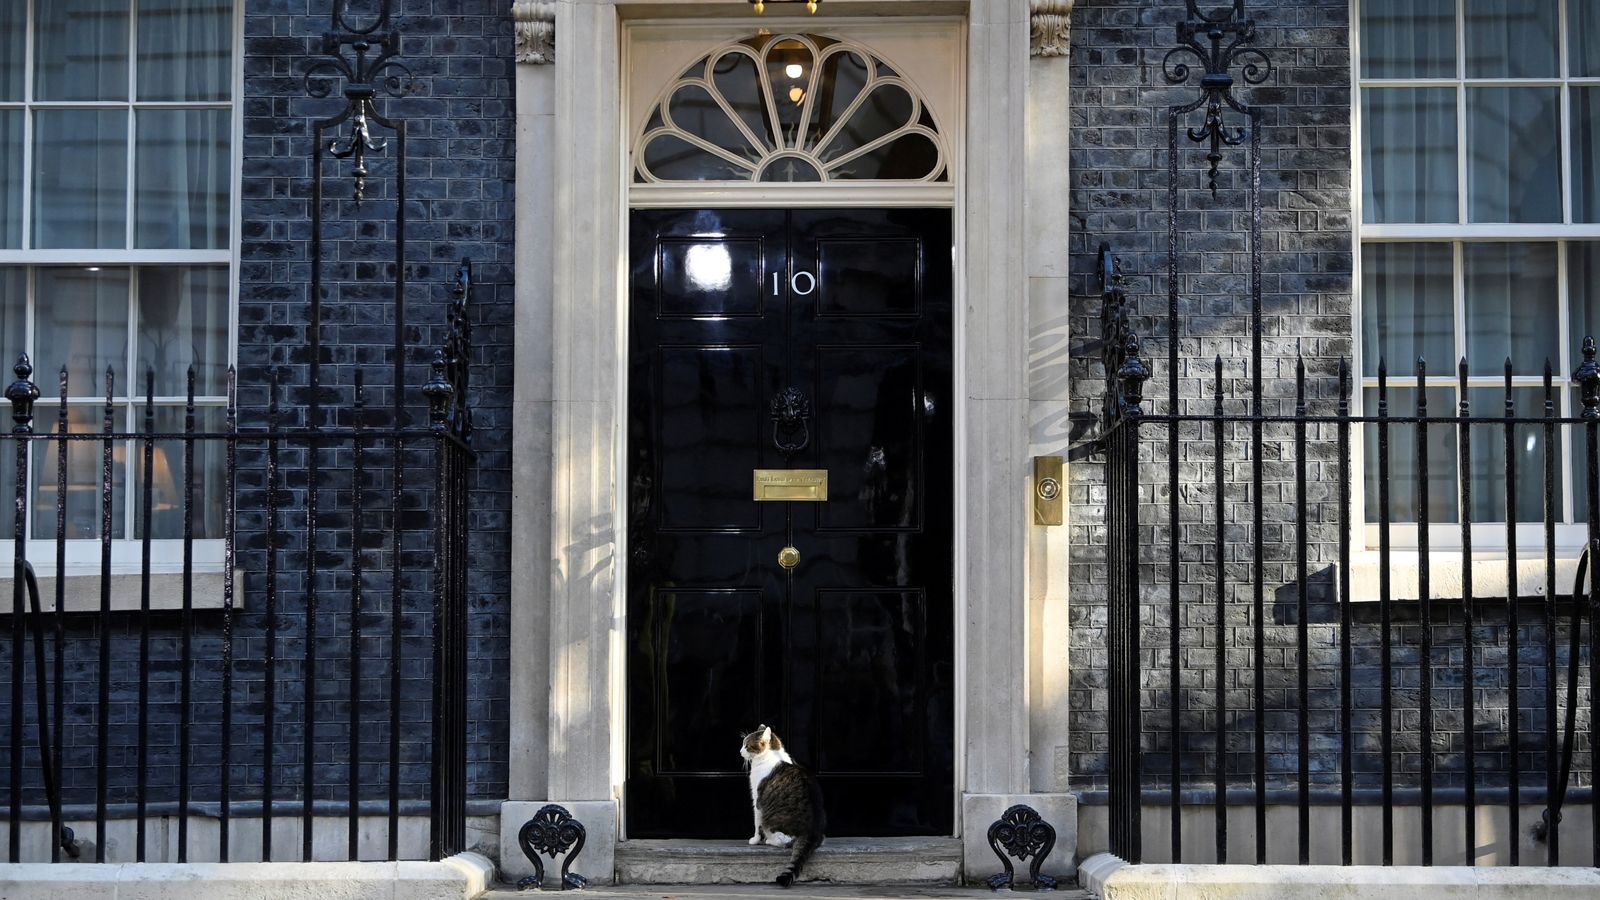 The race to 100 - who are Tory MPs backing to be the next prime minister?